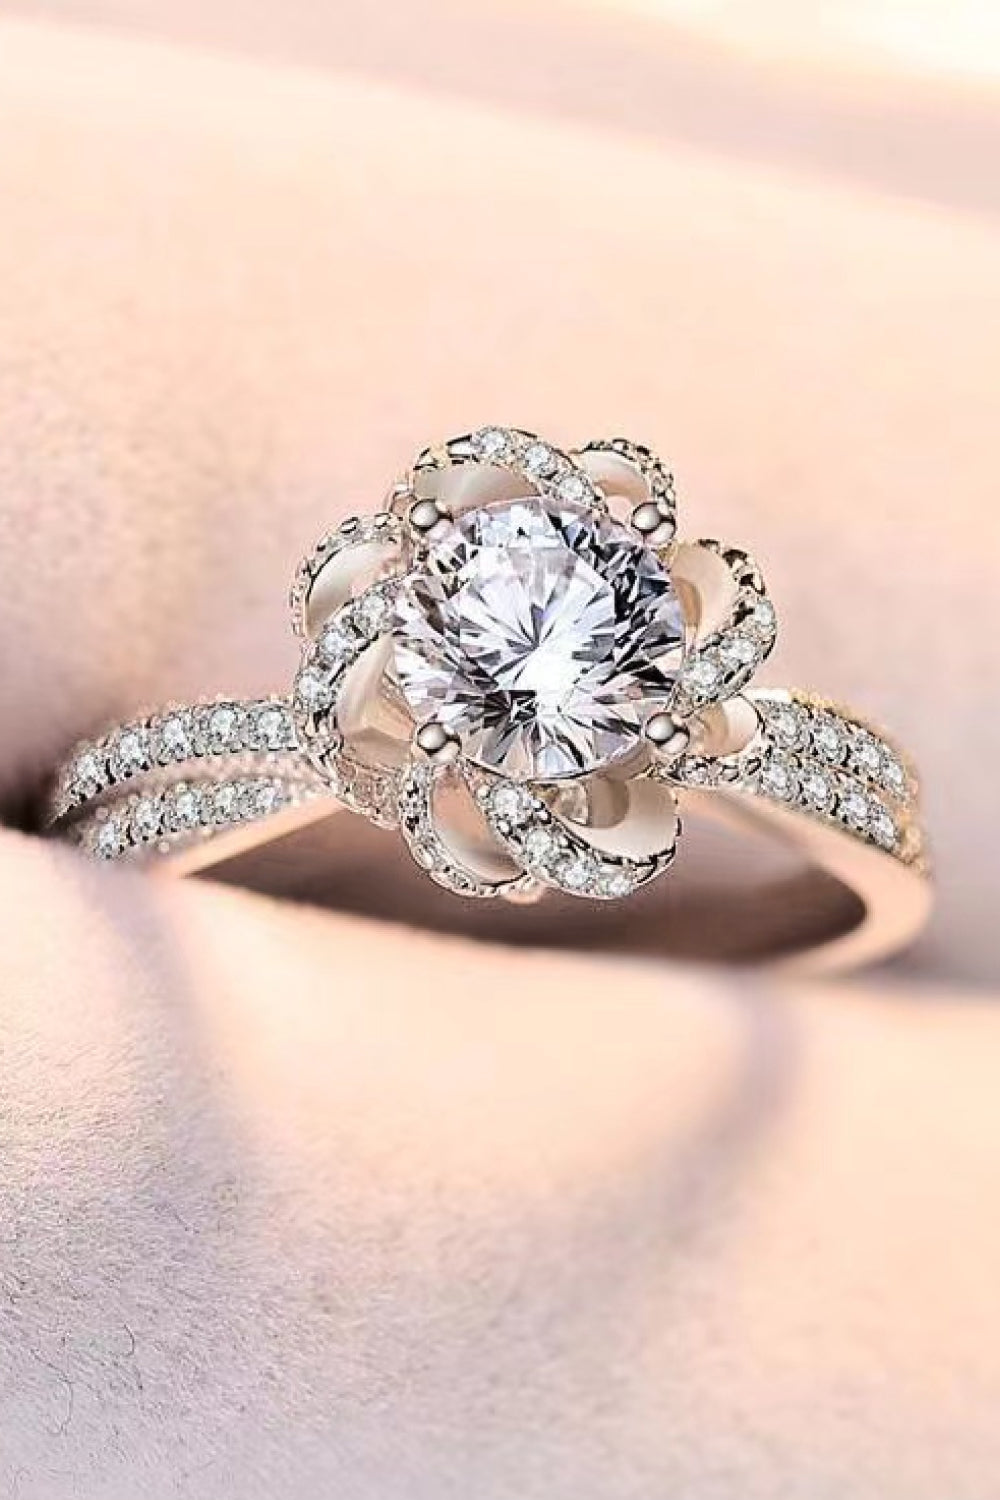 2 Carat Moissanite Floral Platinum-Plated Ring Moissanite Jewelry Brides by Emilia Milan 